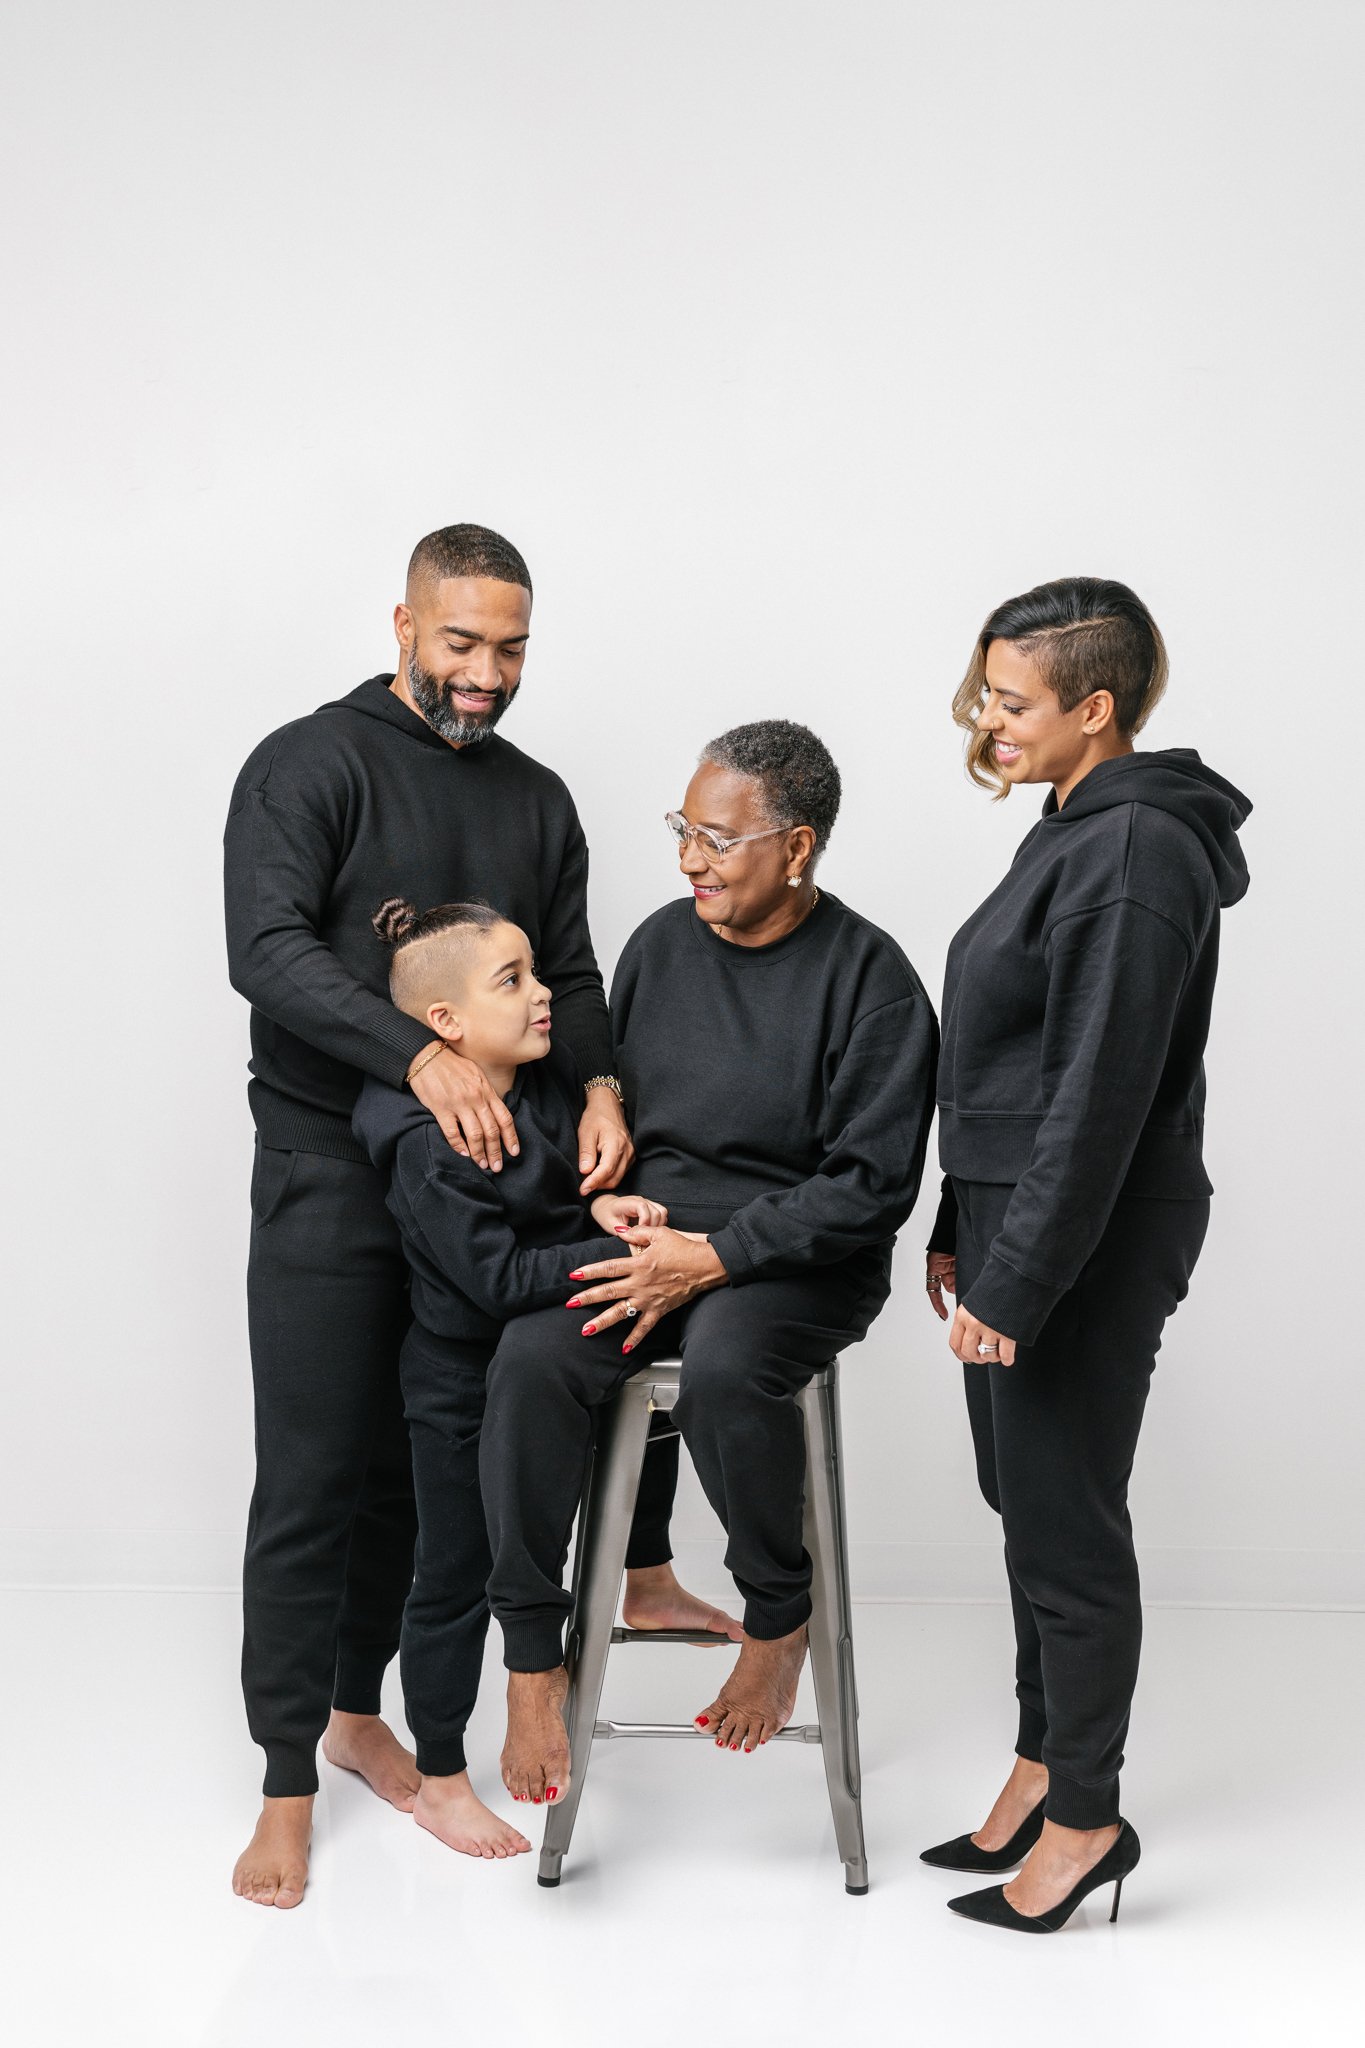  Northern New Jersey photographer Nicole Hawkins Photography captures a family of four smiling at one another. NJ #NicoleHawkinsPhotograaphy #NicoleHawkinsFamilies #Modernfamilypictures #studioportraits #matchingfamilyoutfits #NJphotographer 